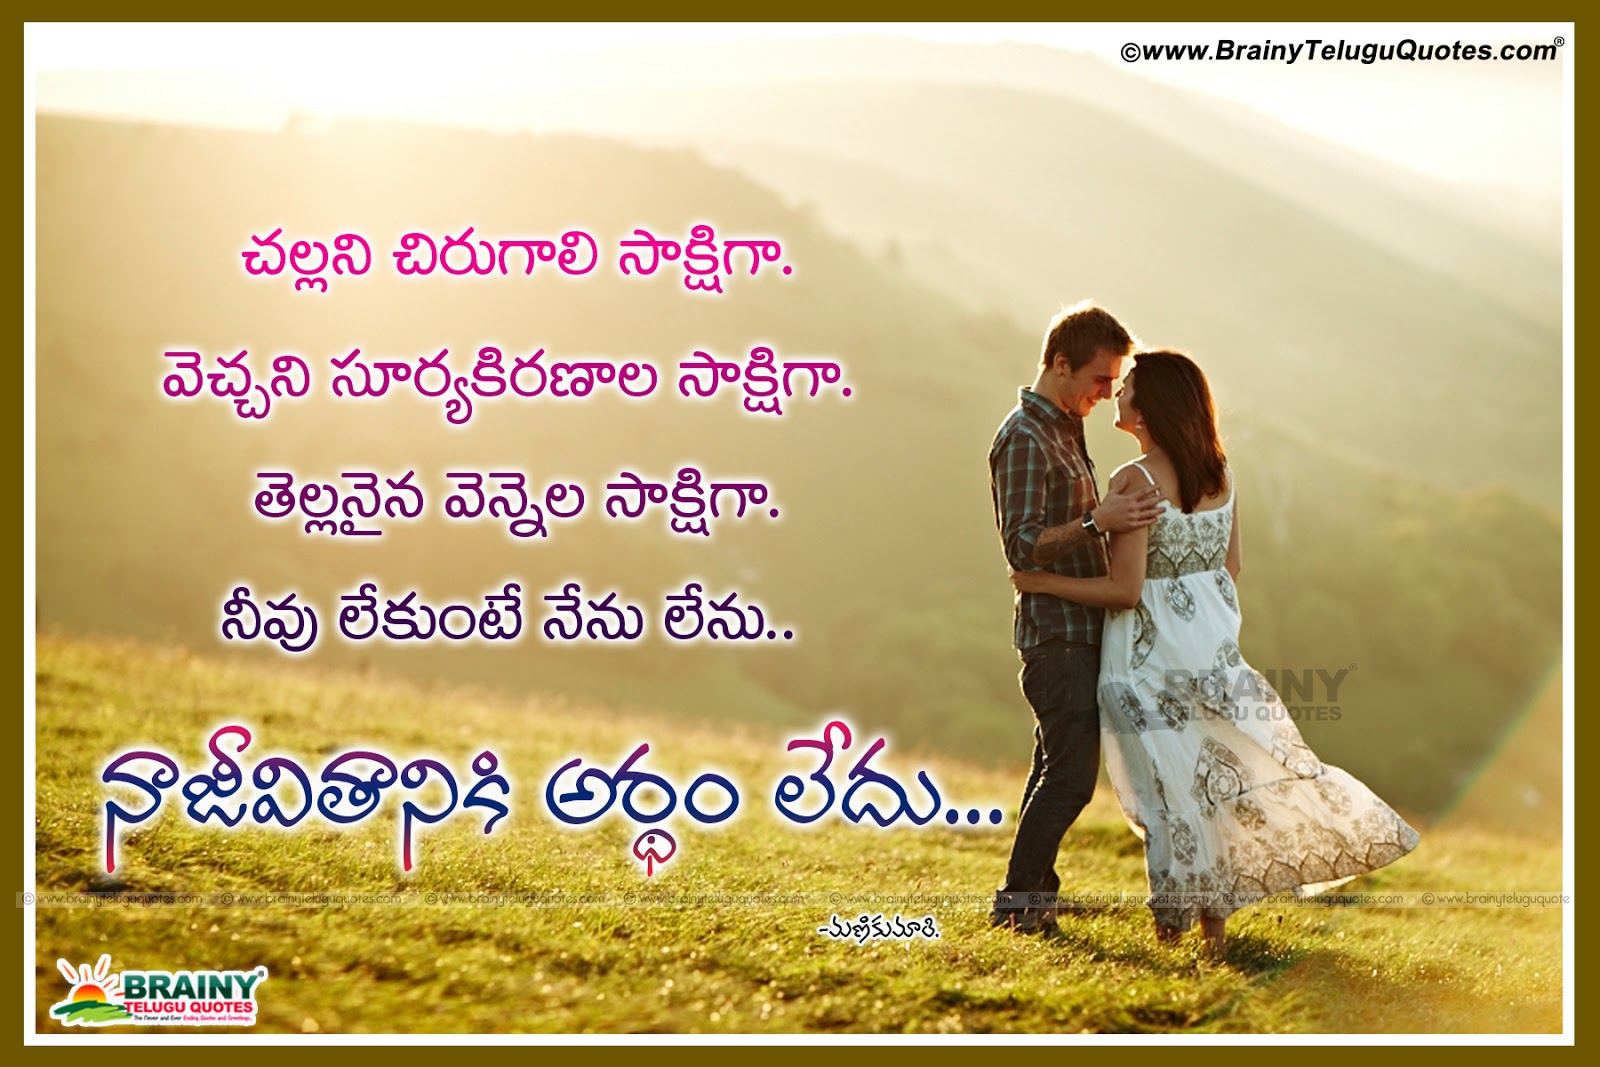 Romantic Telugu Love Quotes with Cute Couple Hd Wallpaper